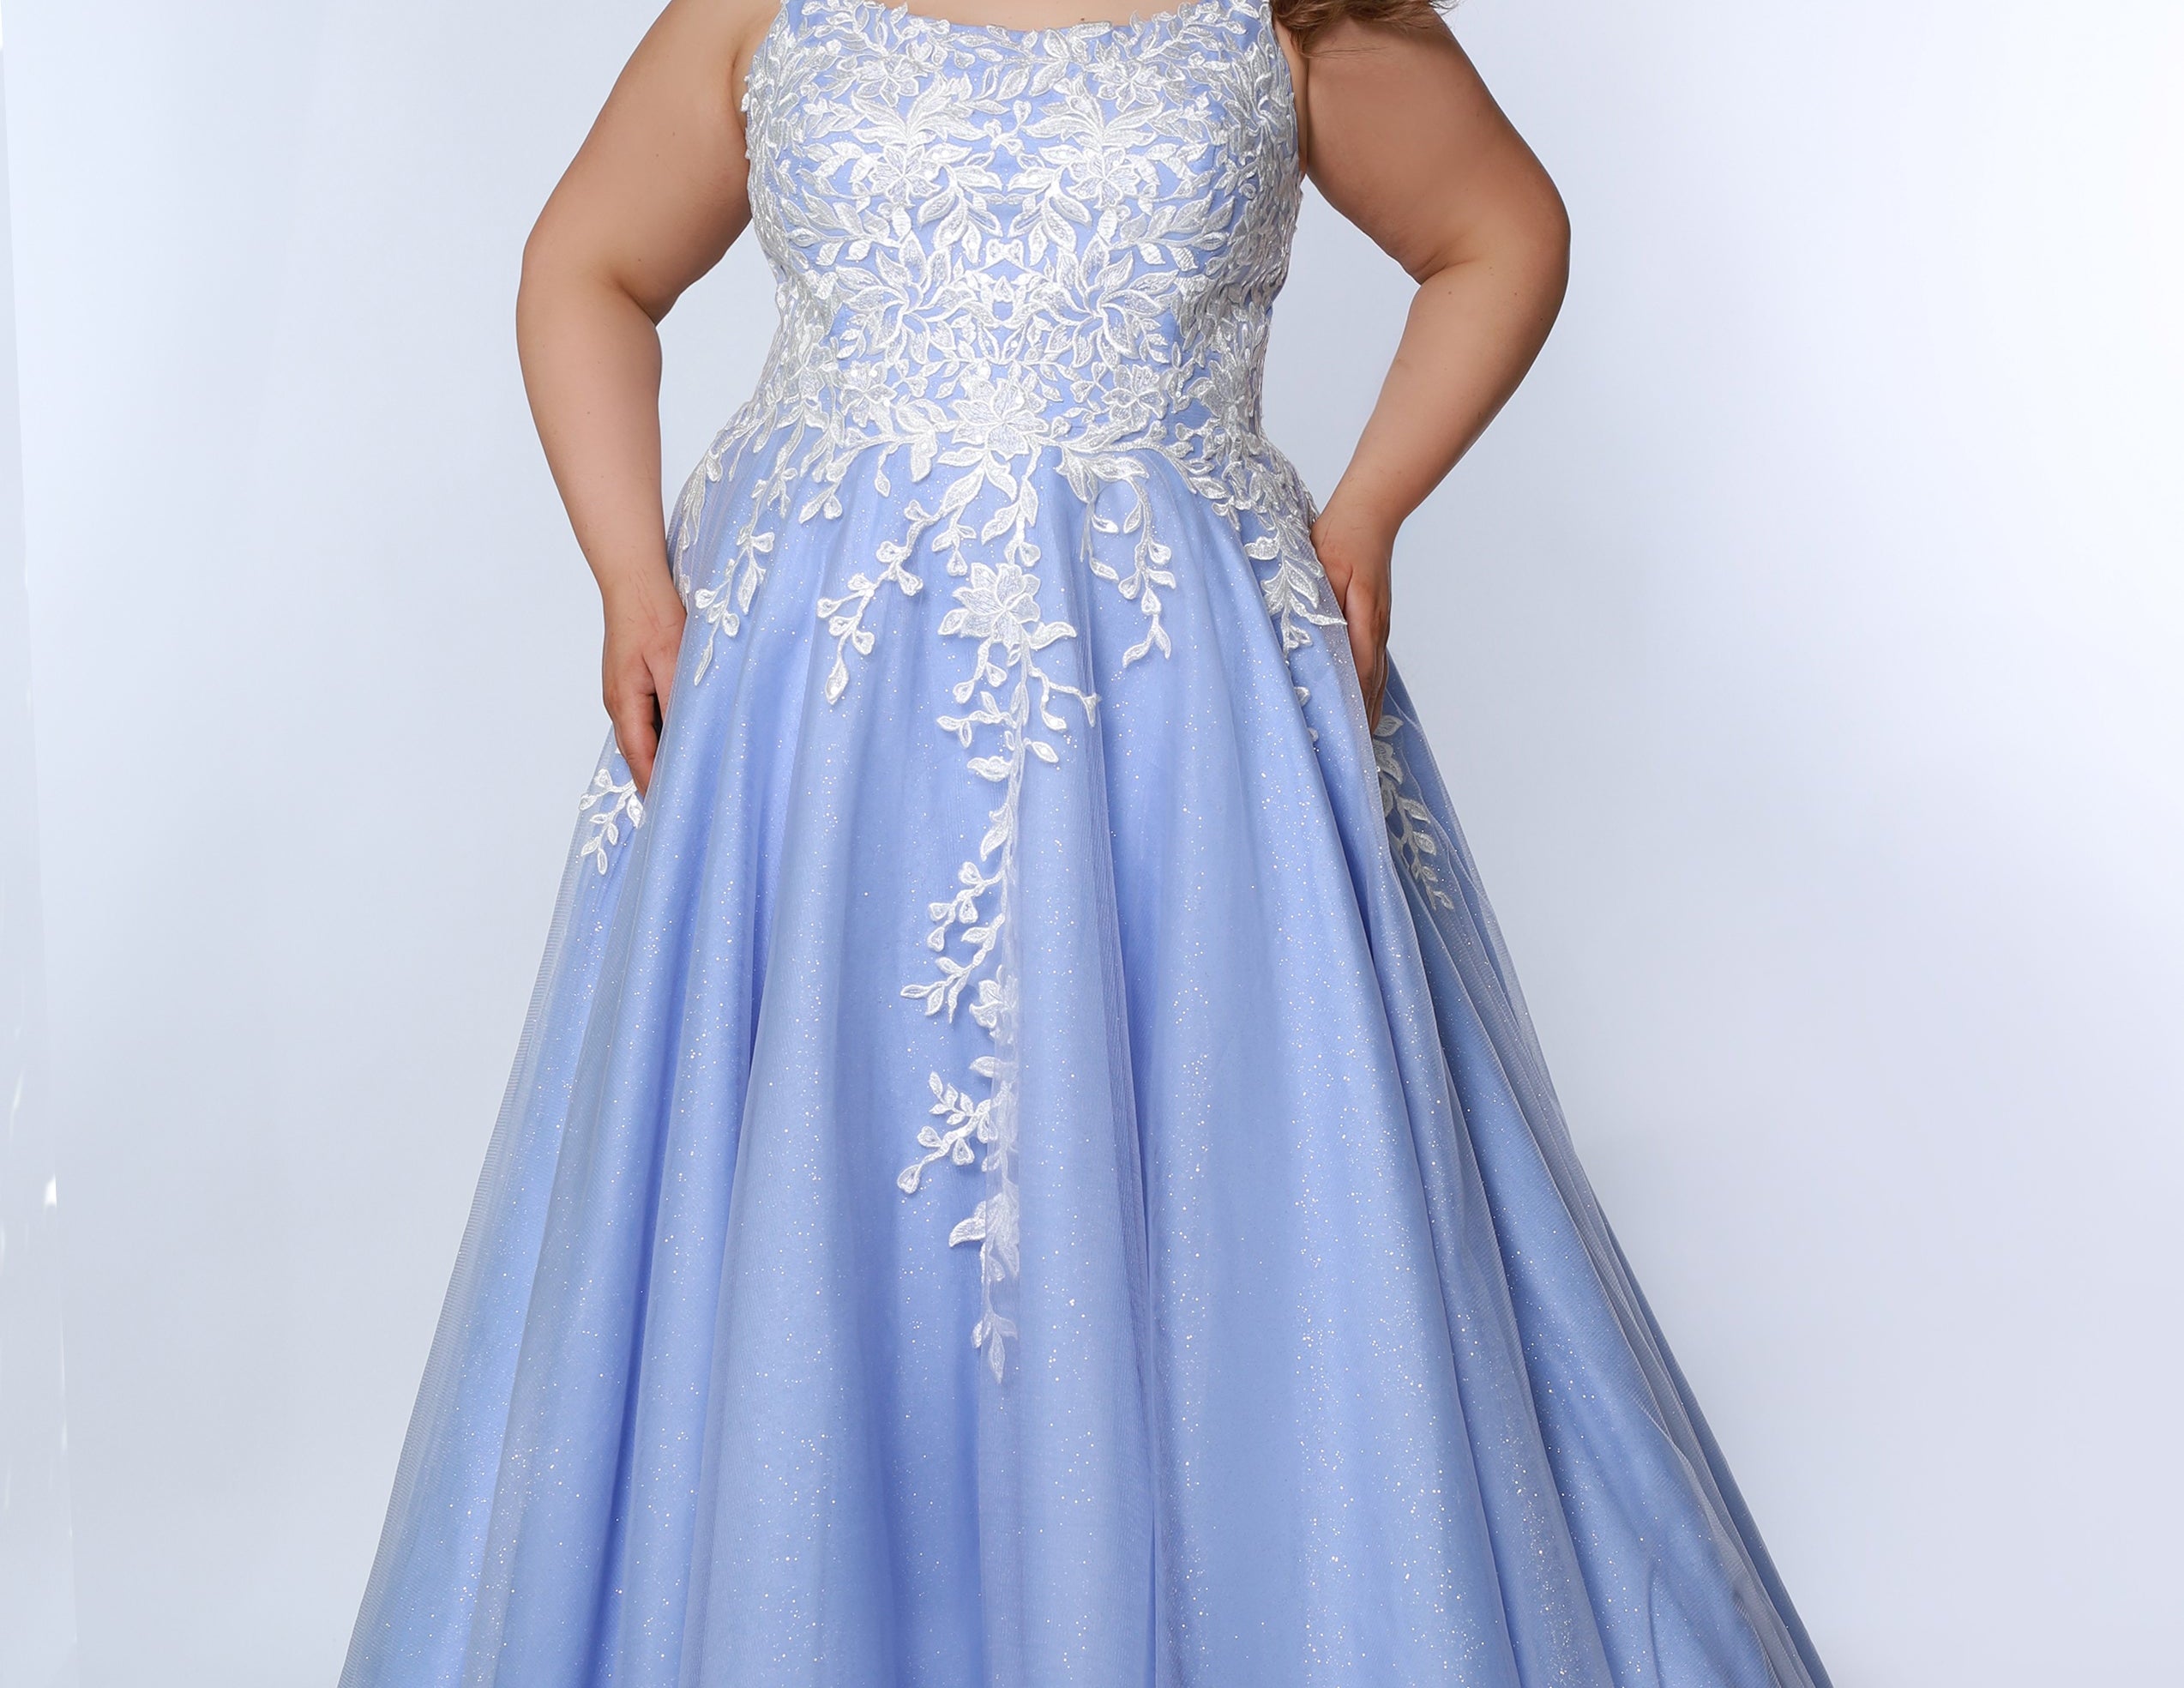 Sydney’s Closet SC7350 in periwinkle. Full A-line silhouette with a scoop neckline and lace covered straps. Beaded and appliqued, with 3D flowers on the bodice. A natural waistline and stretch knit lining. Has a floor length tulle skirt and a long invisible back zipper. 